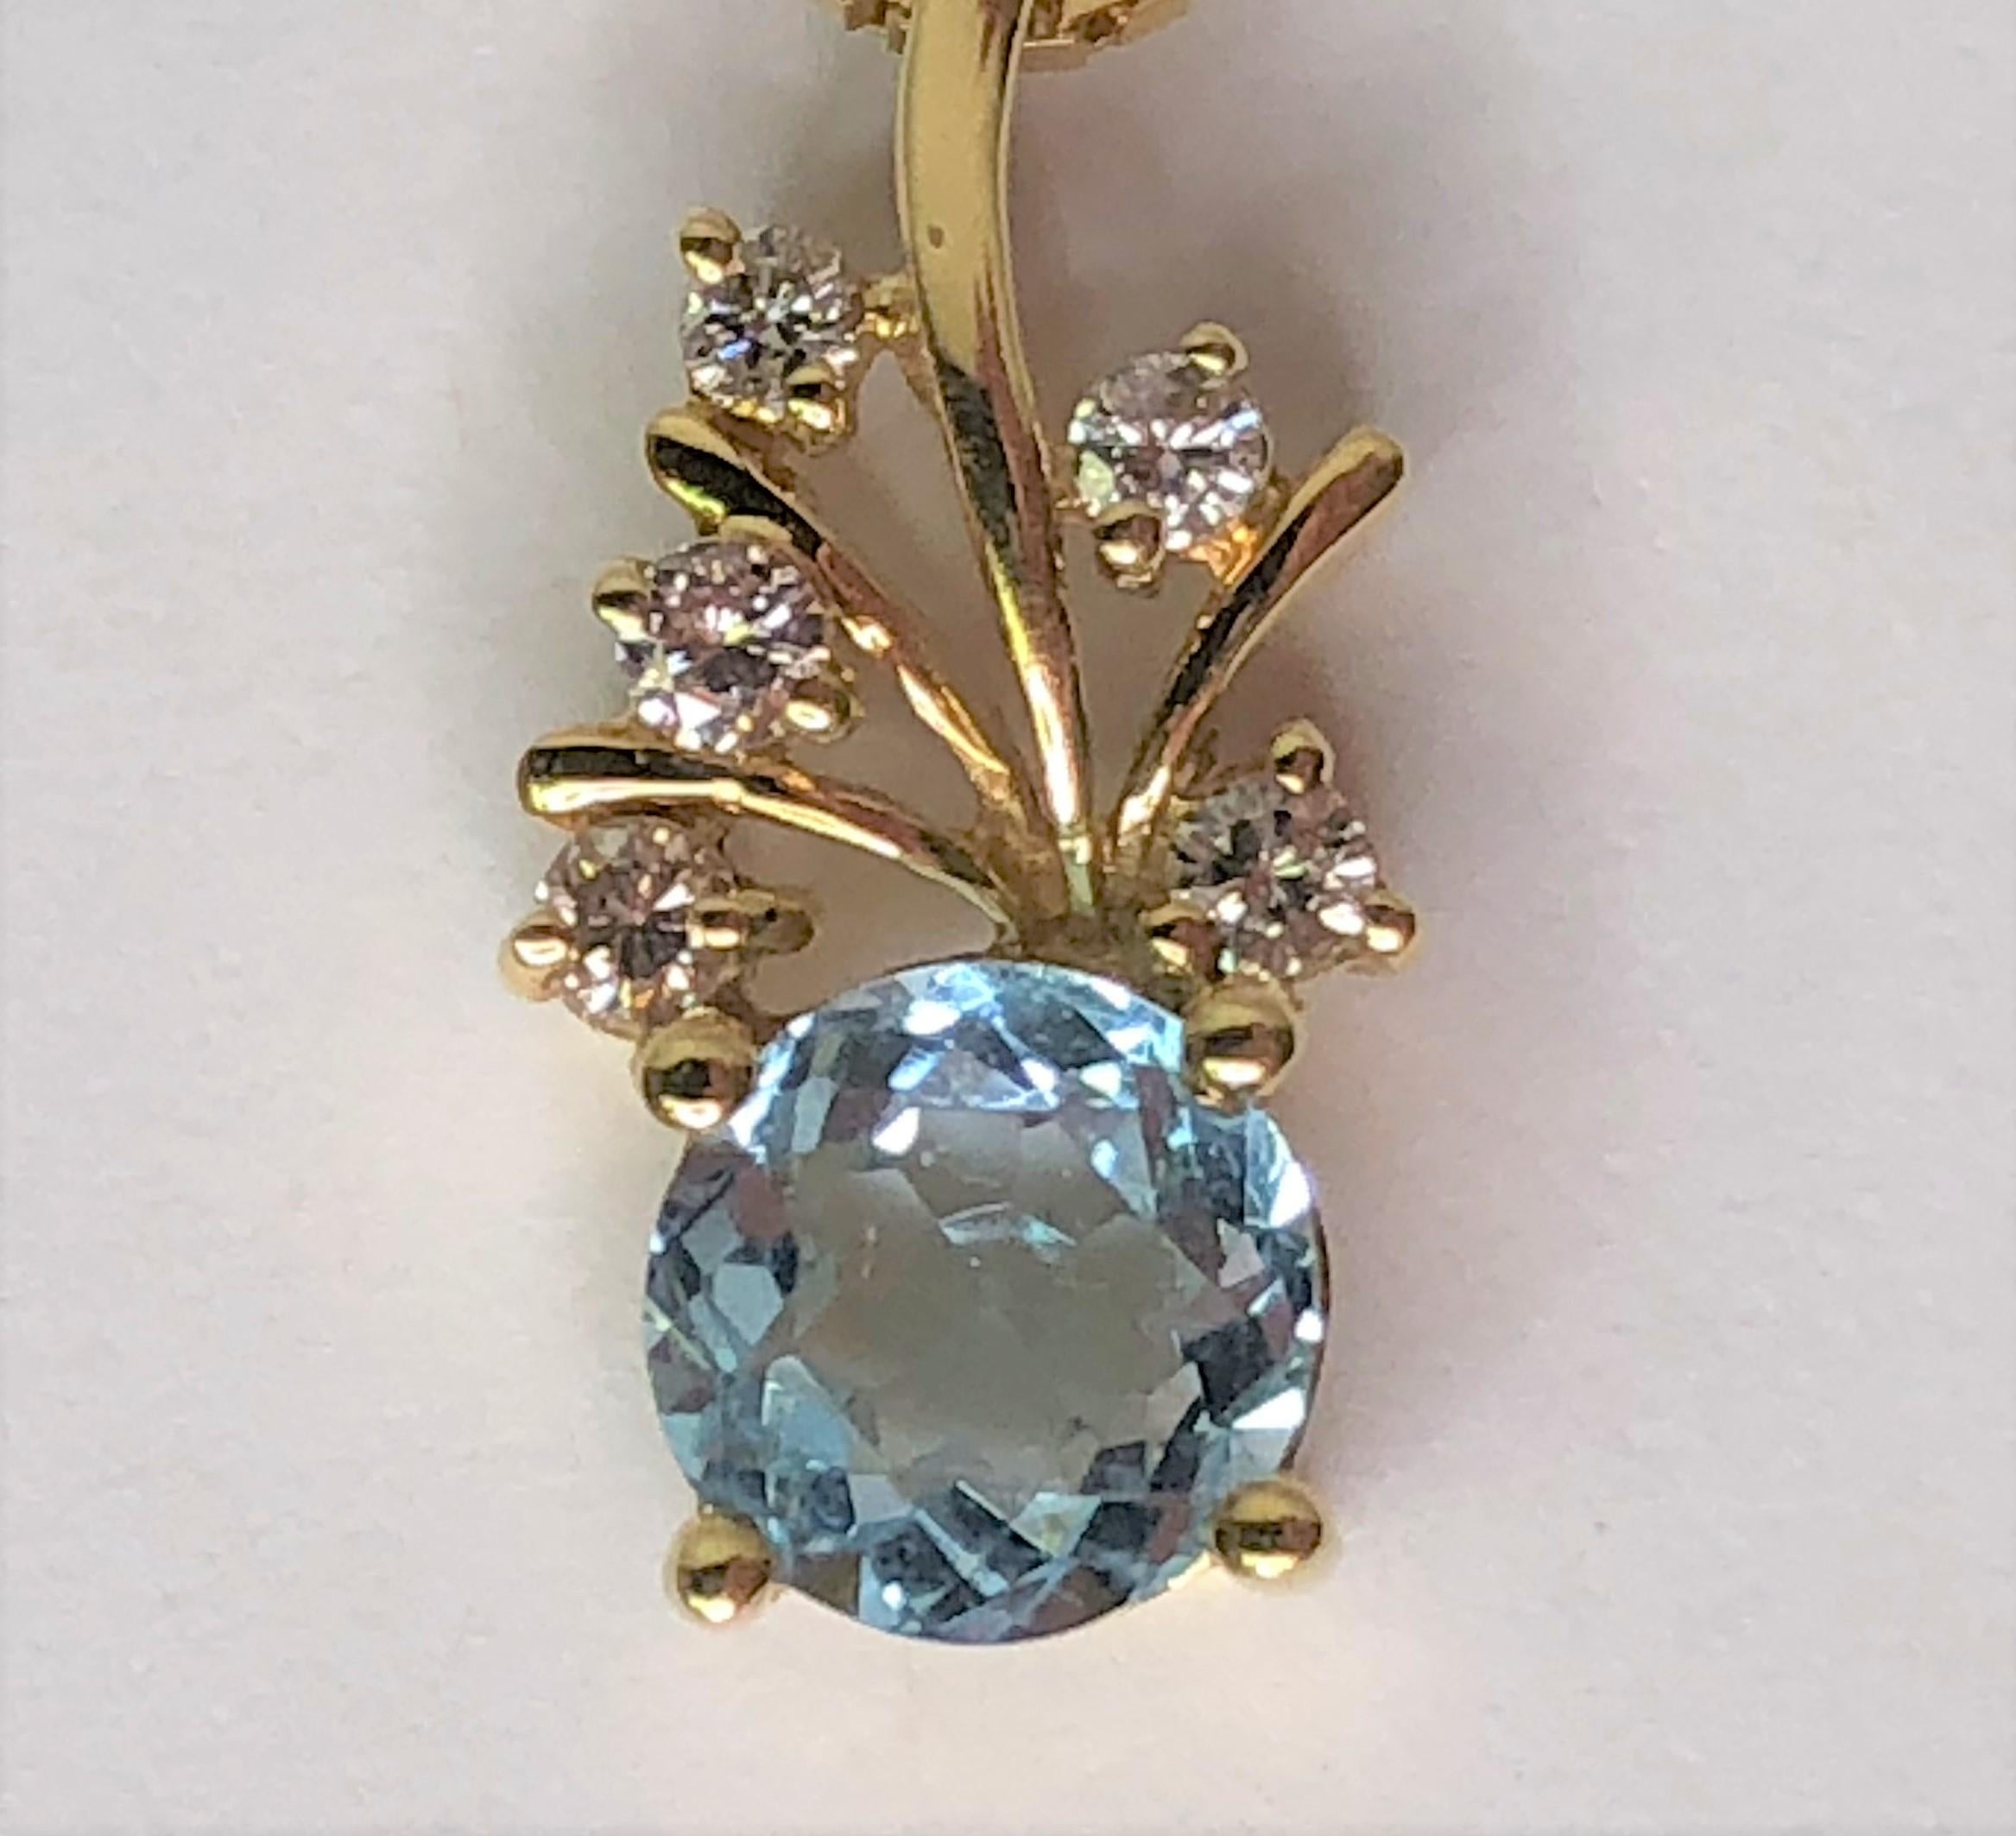 This sparkly necklace is an easy everyday wear!!  
14 karat yellow gold pendant with round blue topaz and 5 round diamonds.
Pendant is a darling 'stem/flower' design with:
One round light blue topaz, prong set, approximately 5.8mm round.
Five round